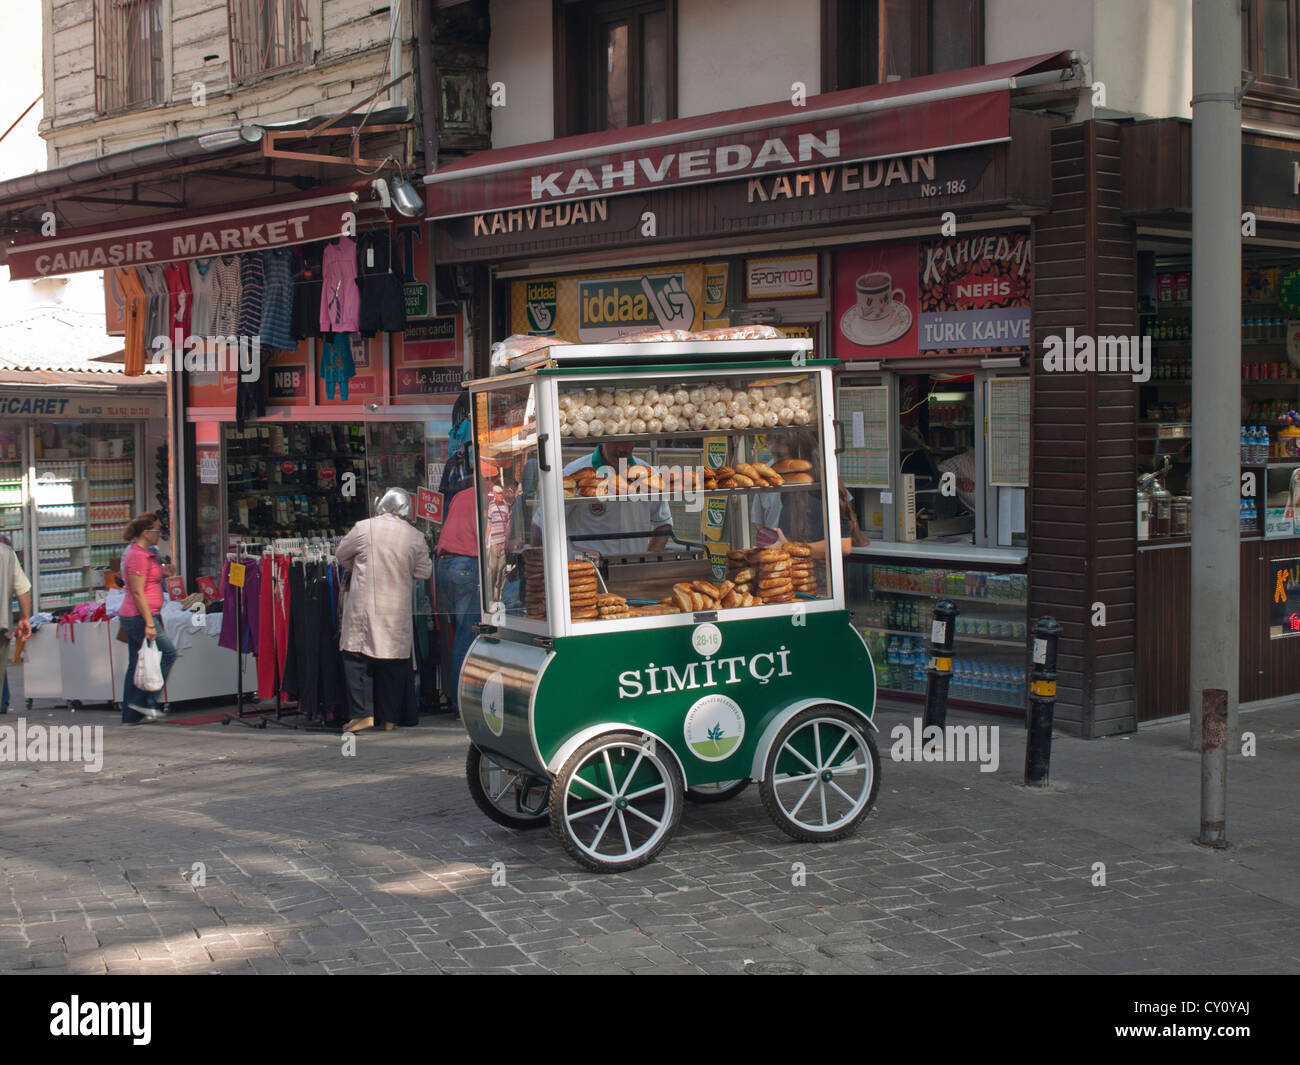 Ambulant vendor selling simit a Turkish bread ring from a cart  in the market district of Bursa Turkey Stock Photo